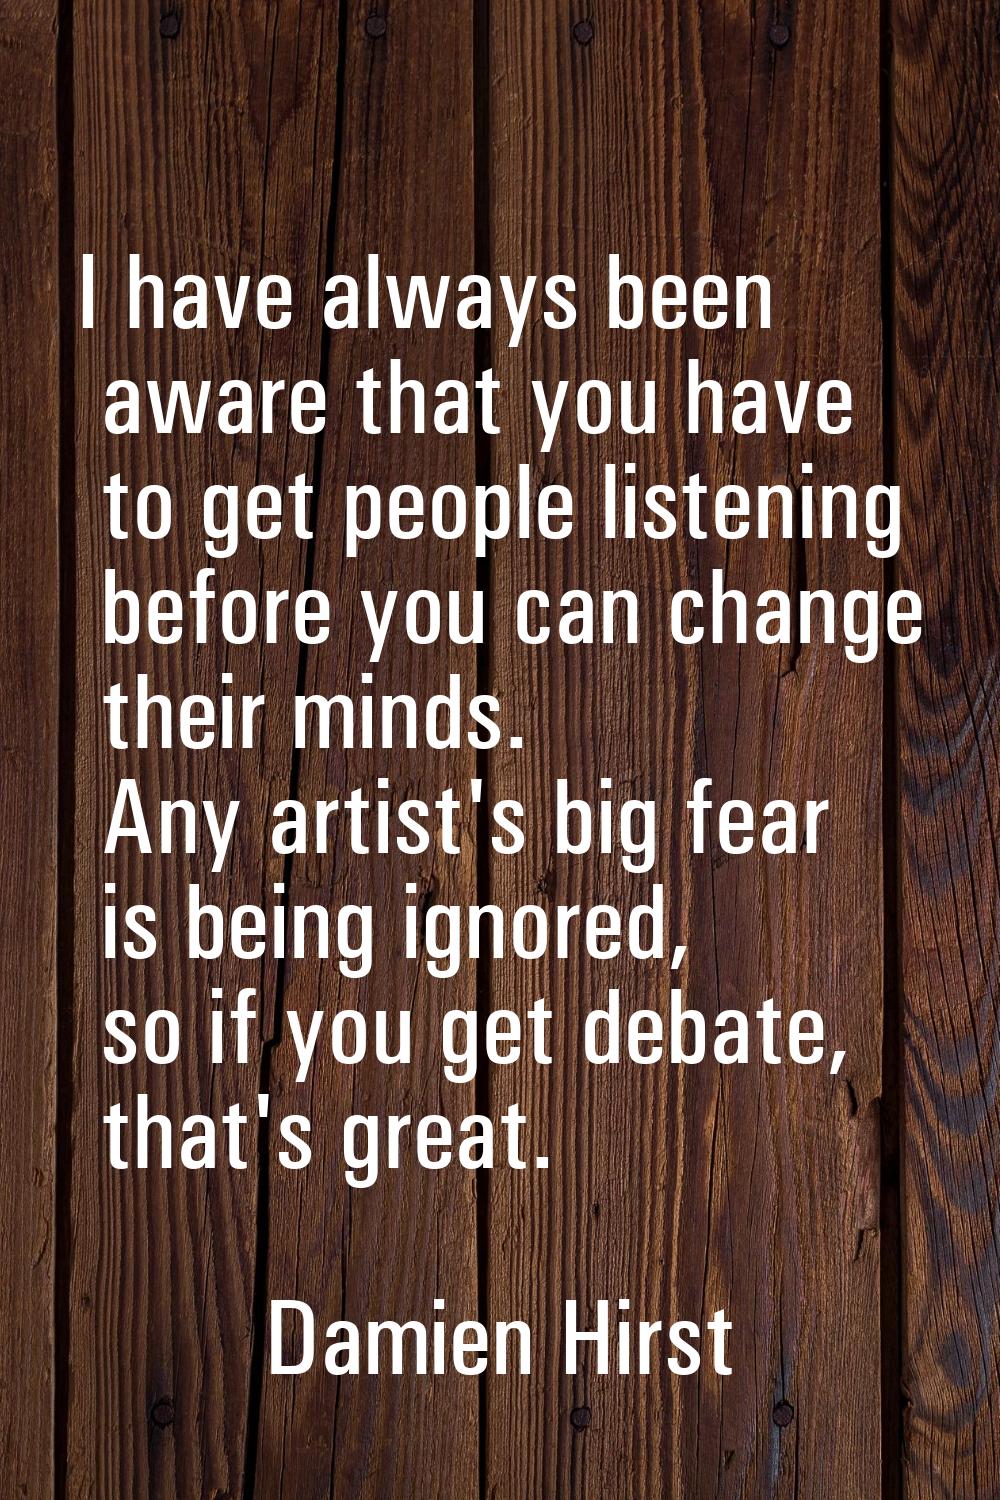 I have always been aware that you have to get people listening before you can change their minds. A